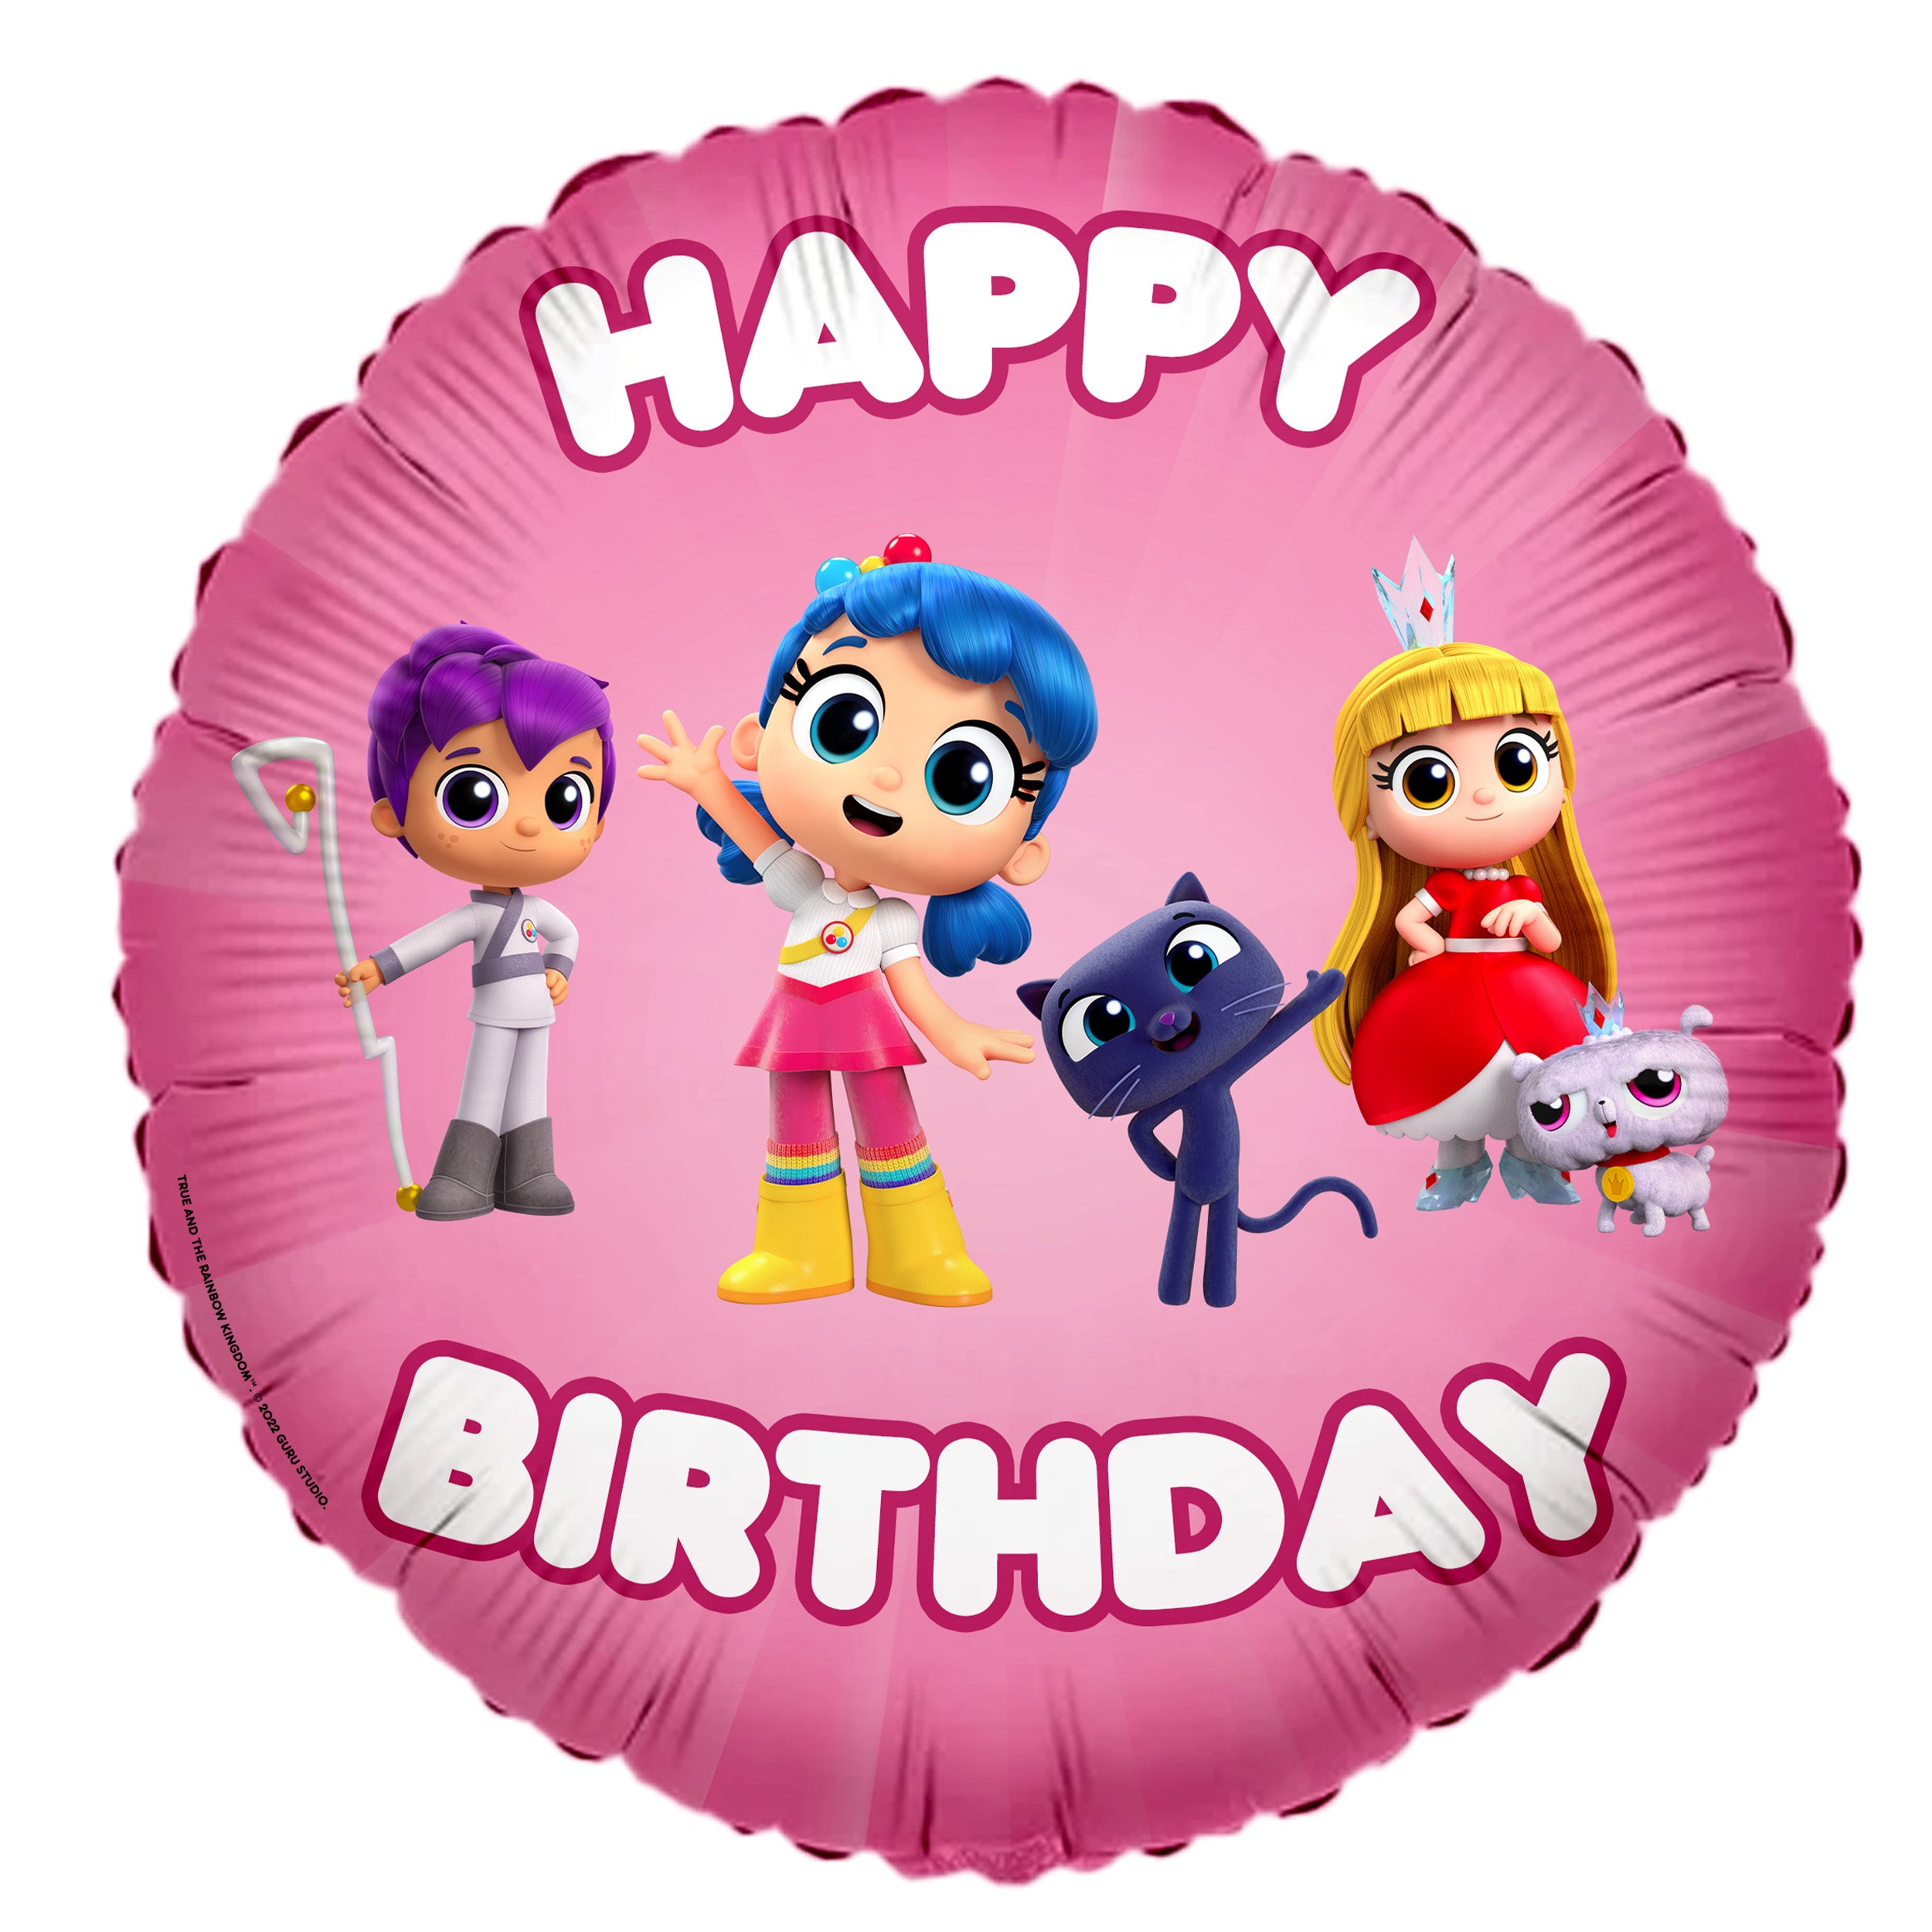 True and the Rainbow Kingdom Foil Mylar Balloons - Add a Splash of Color to Your Celebrations!